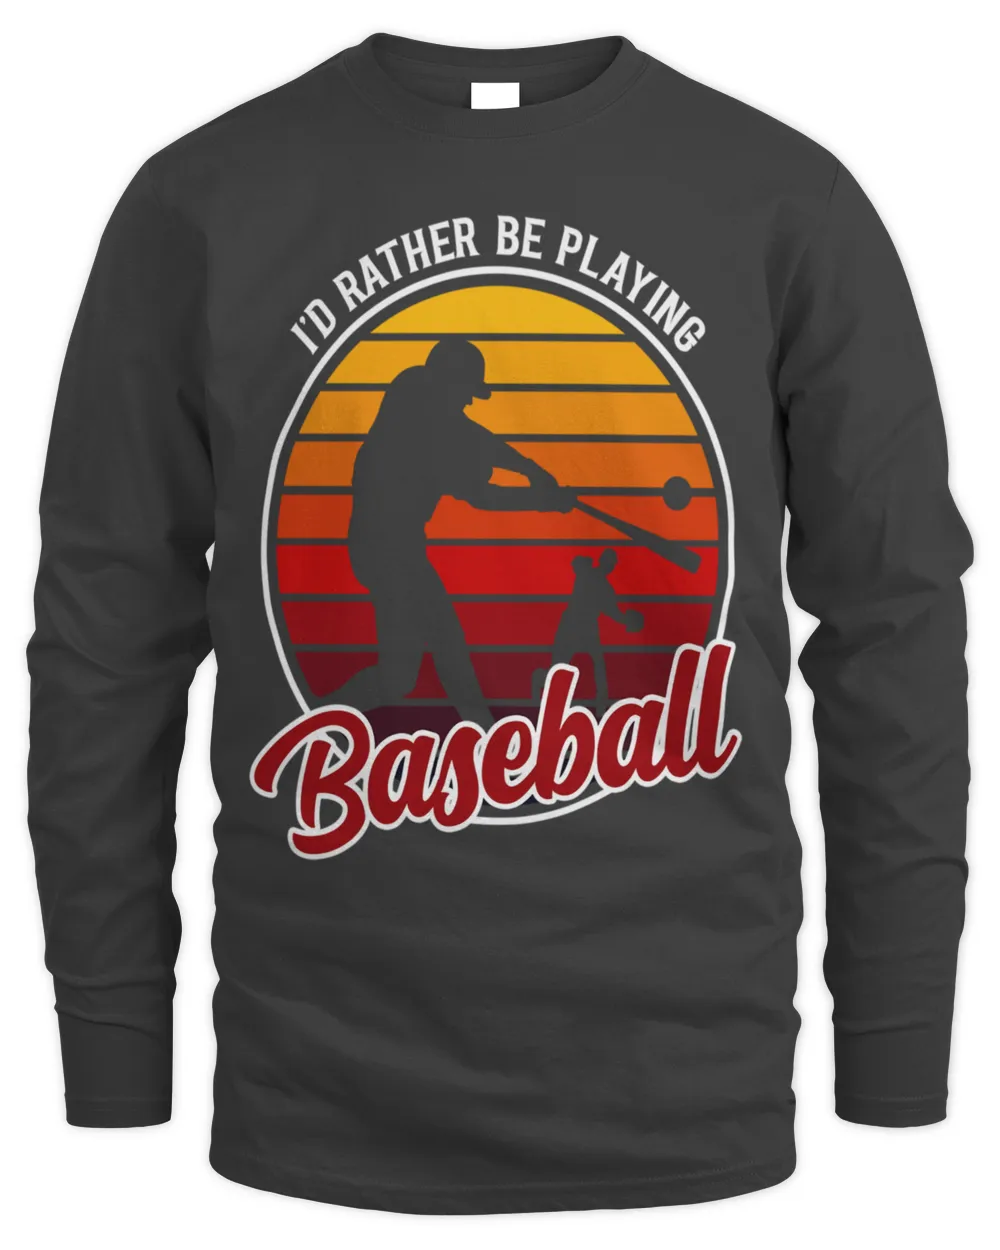 I'd rather be playing baseball tee